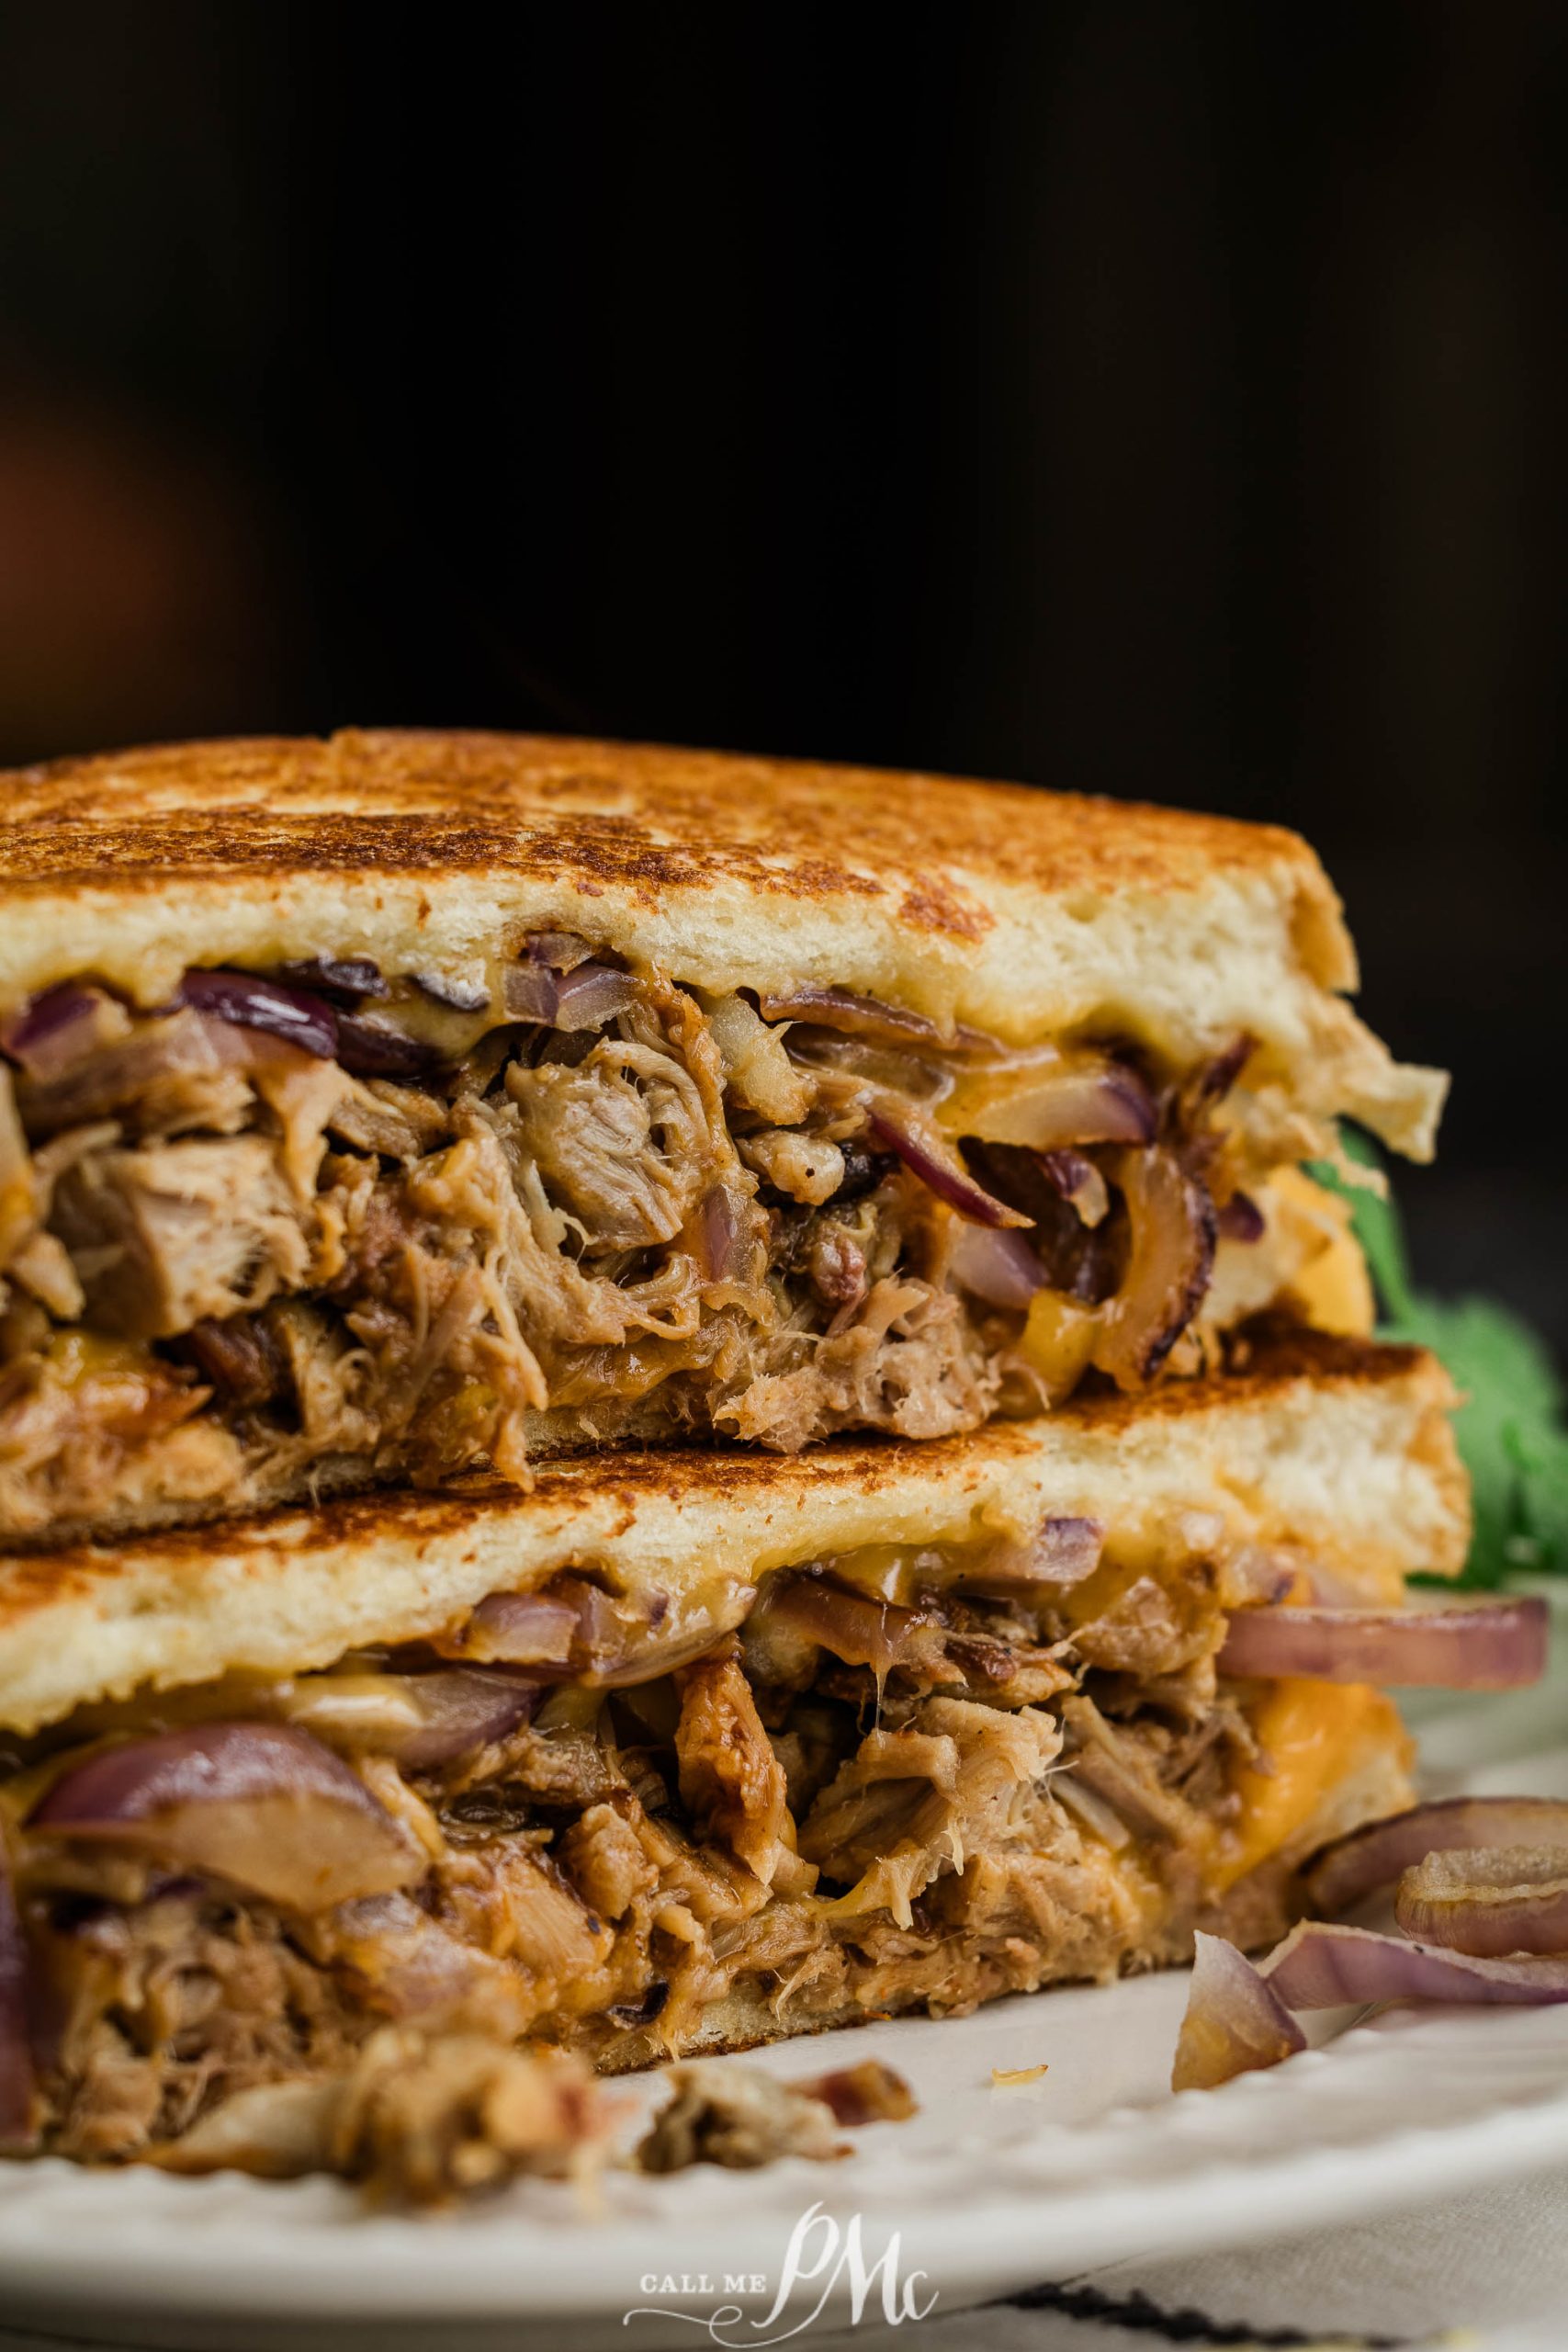 Pulled pork grilled cheese sandwich on a plate.